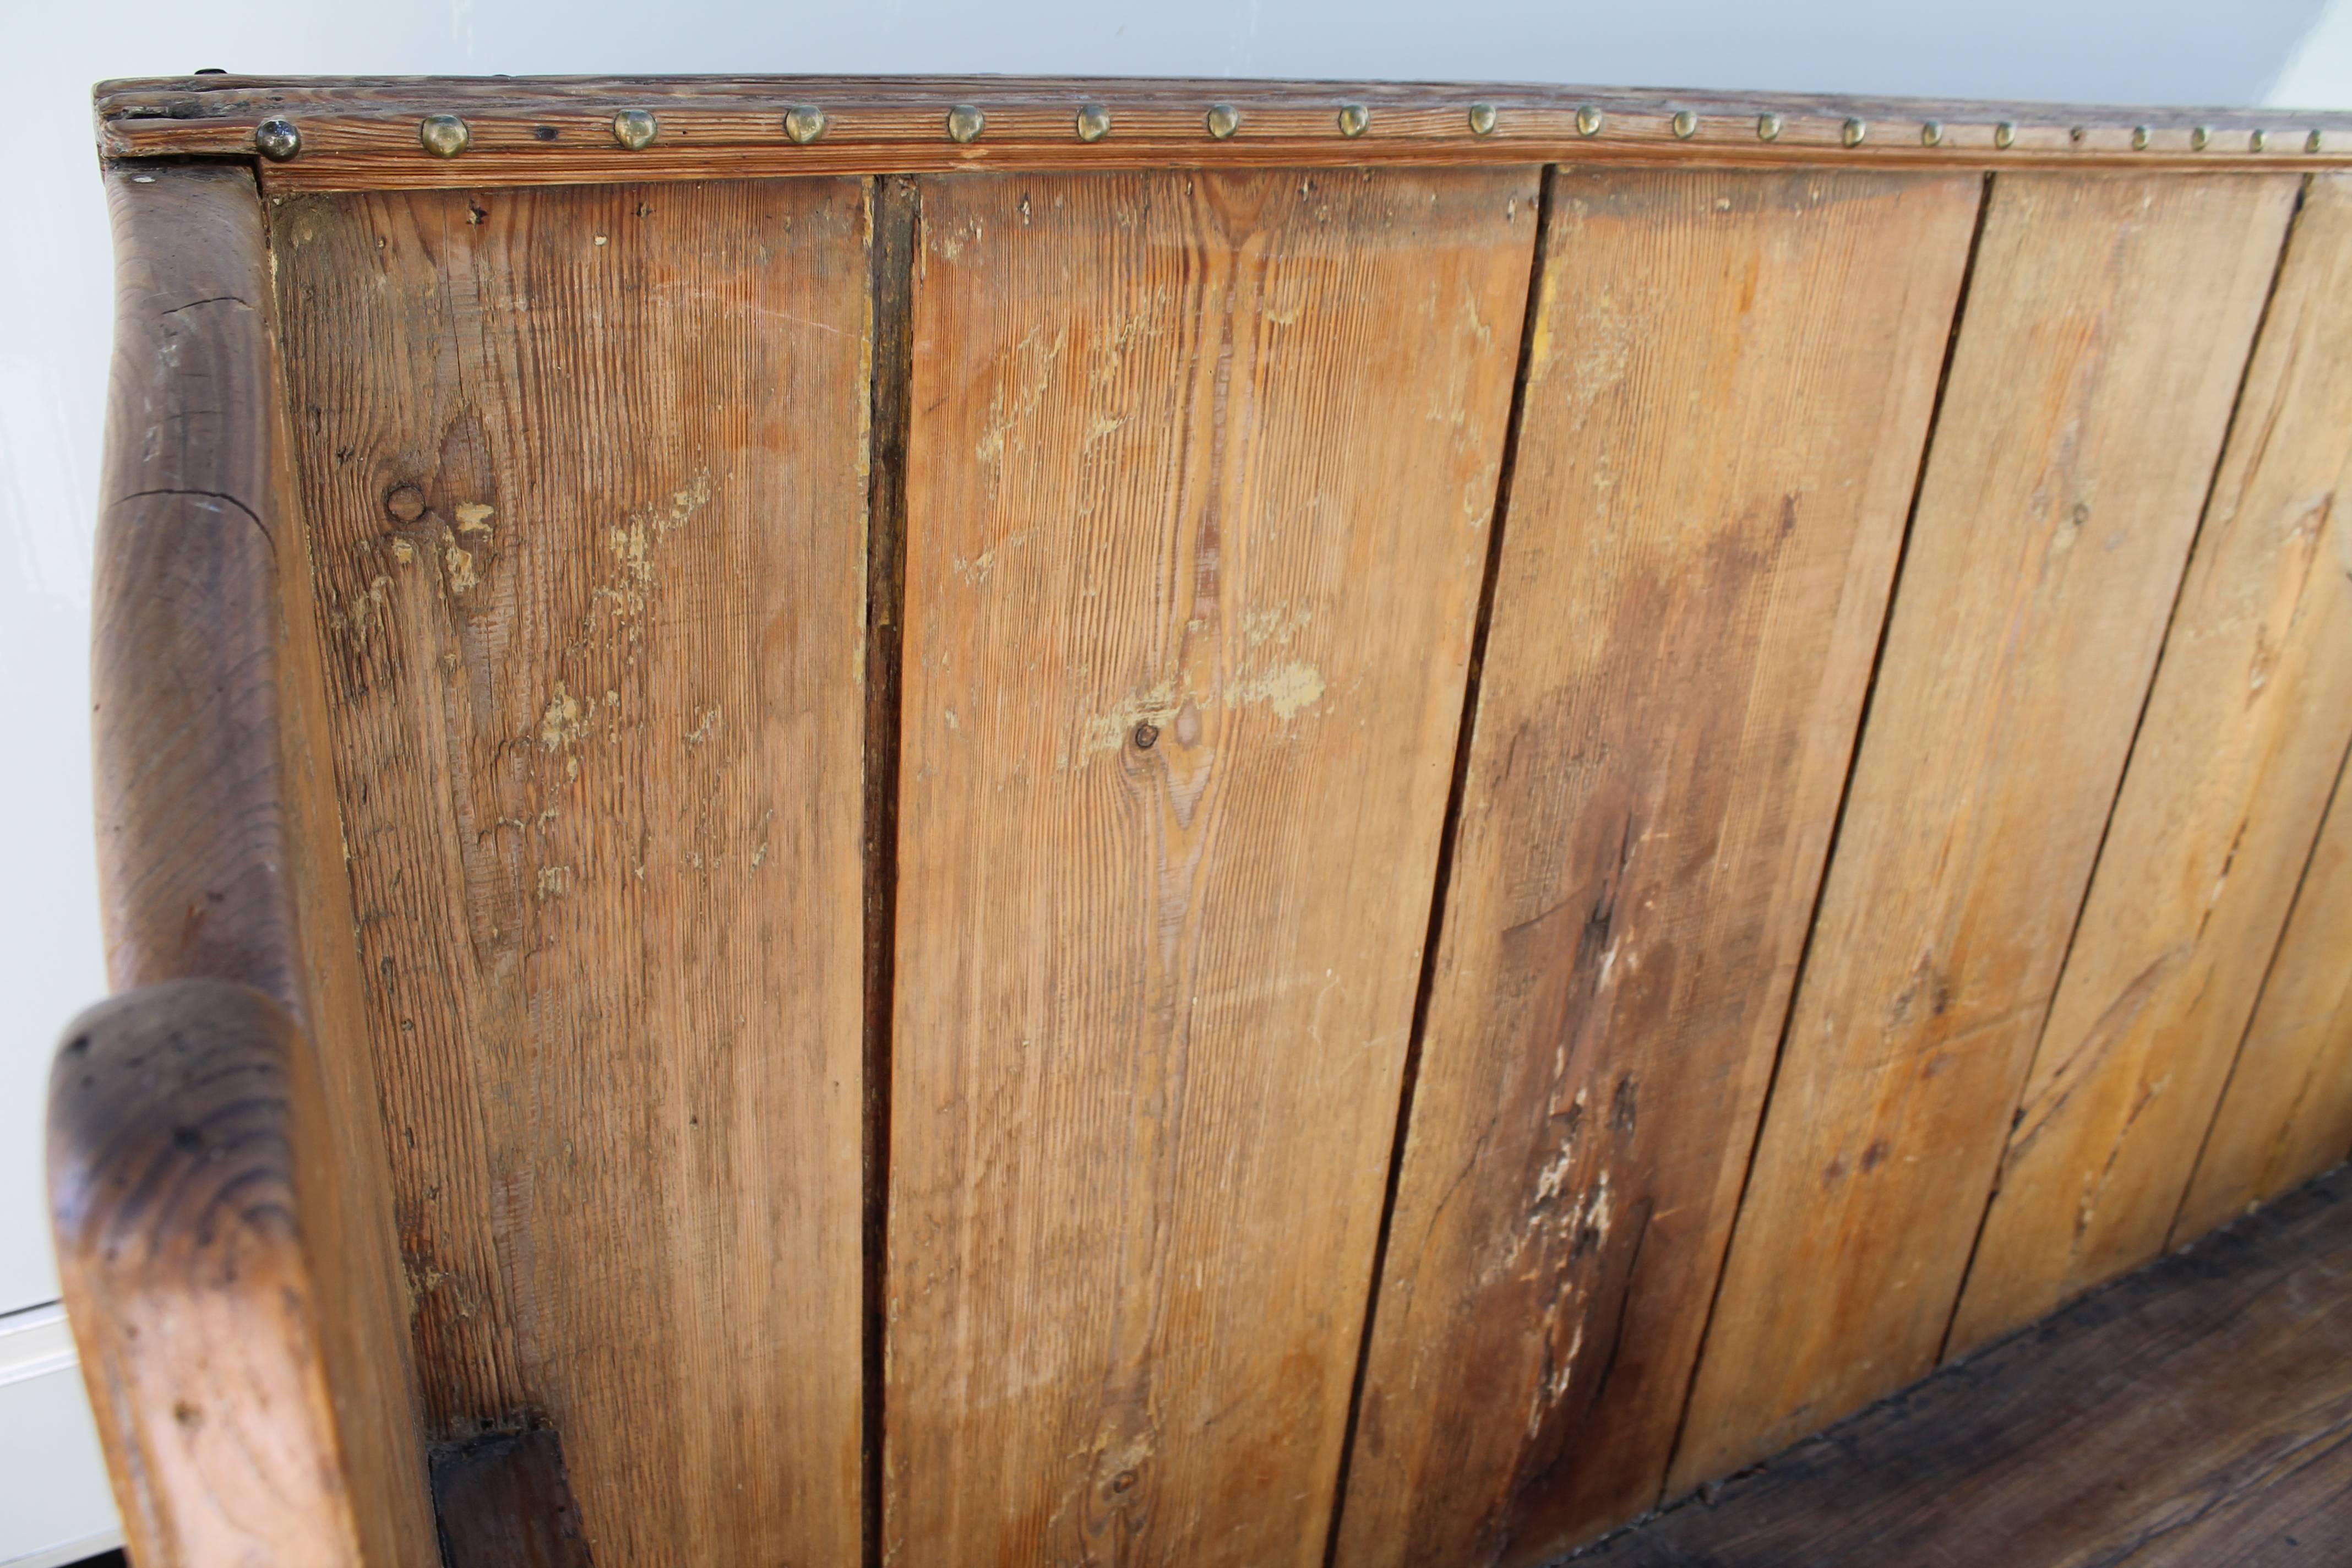 Patinated Early 19th Century Handmade Rustic Settle from the Mid West